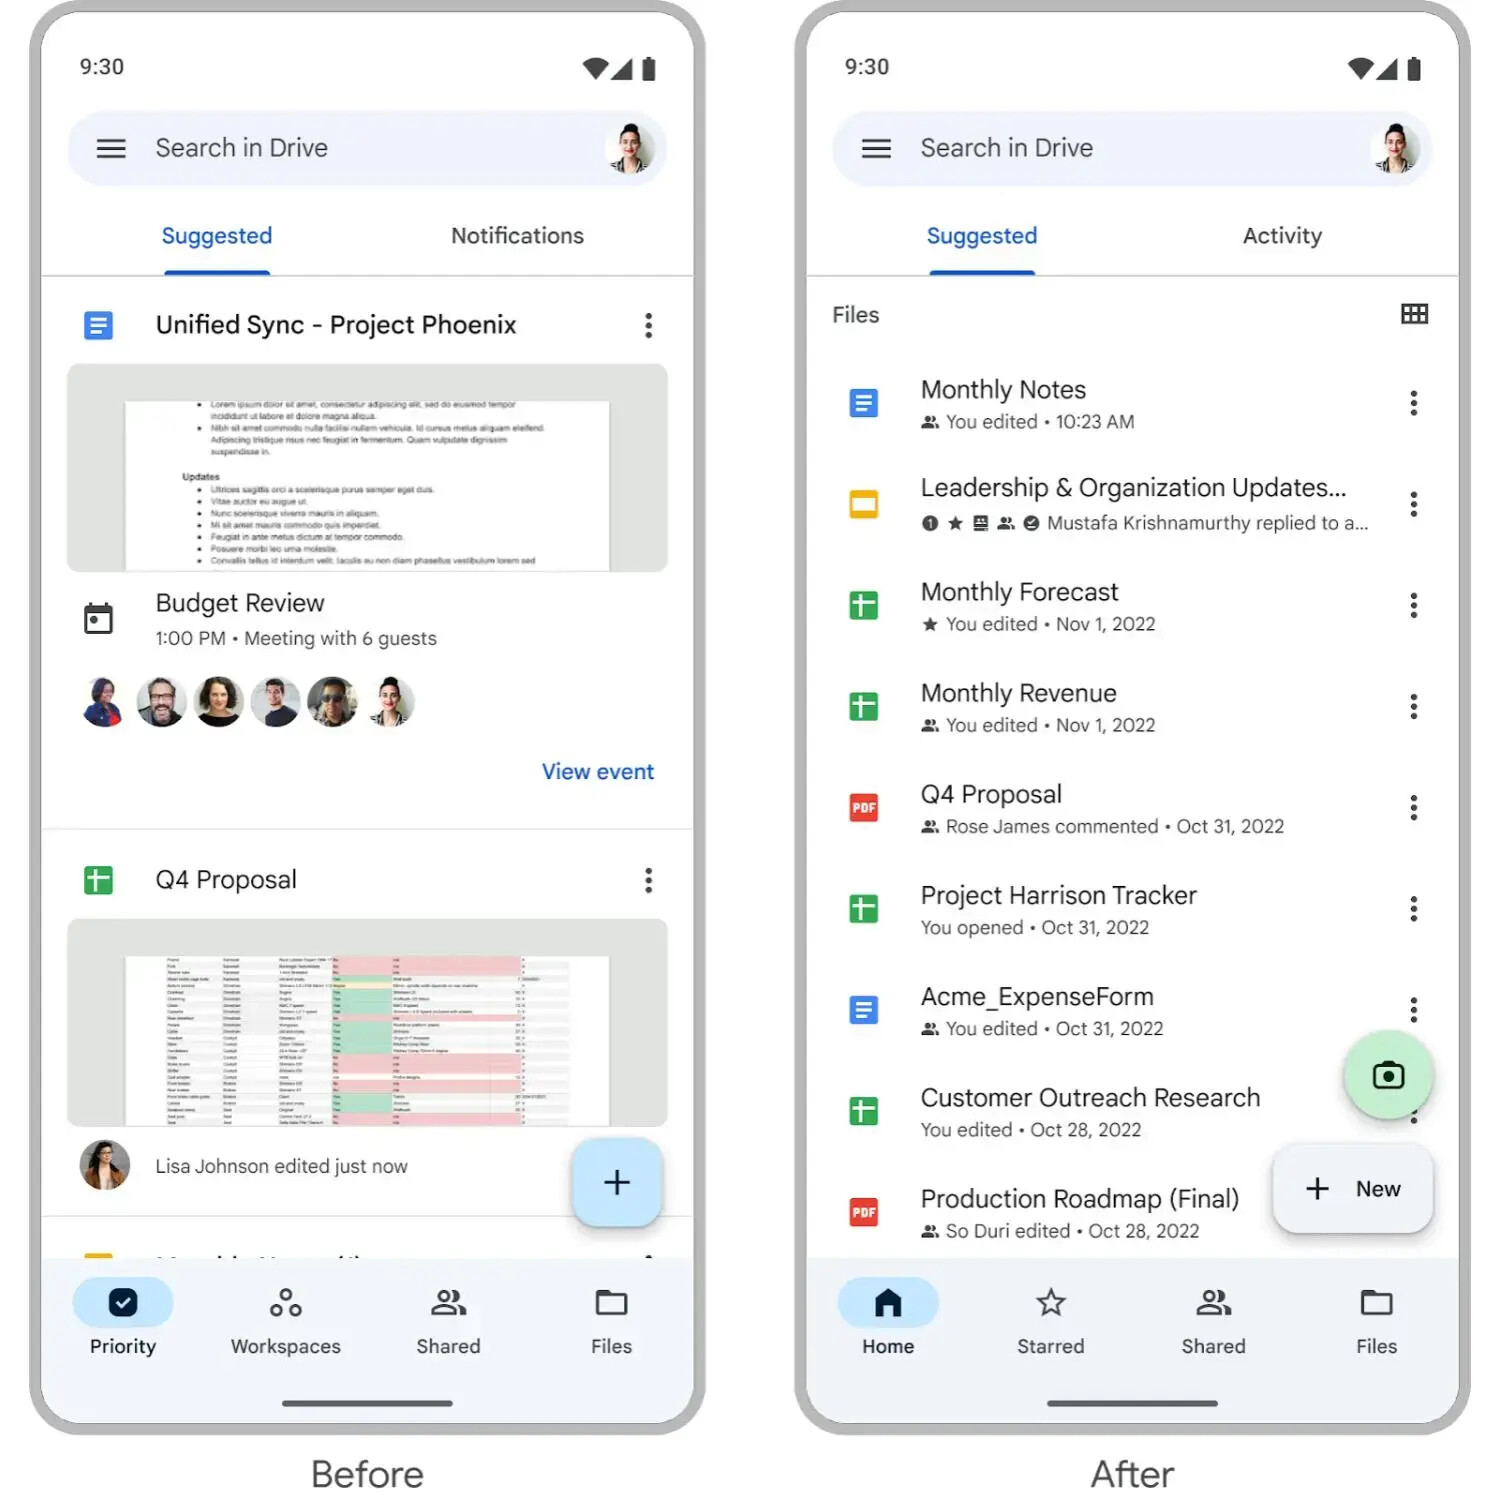 (Image source – 9to5Google) The homepage before and after the new update – Google Drive gets a revamped homepage for Android and iOS users